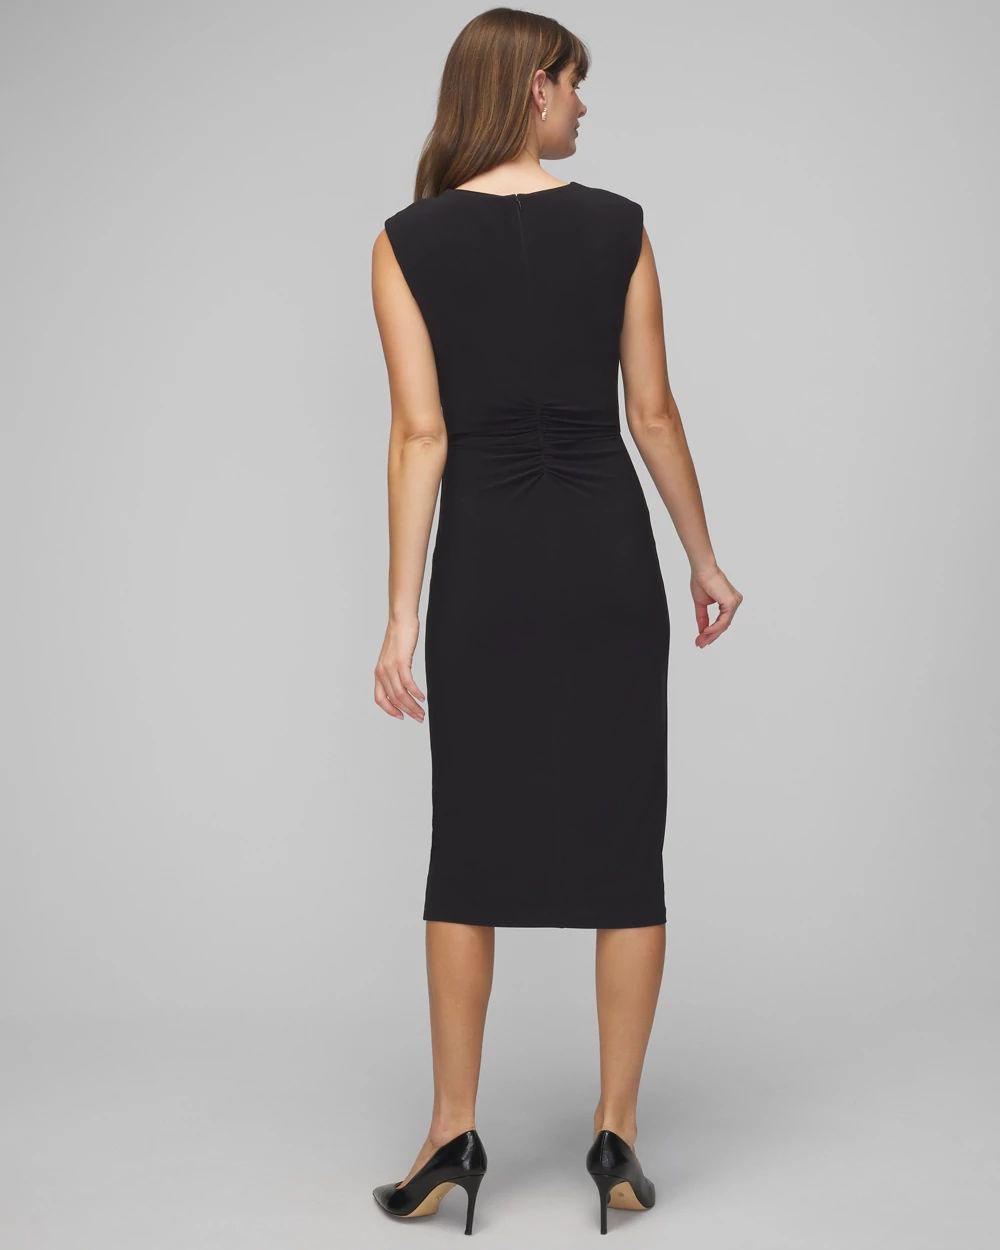 Sleeveless Ruched Bodycon Midi Dress click to view larger image.